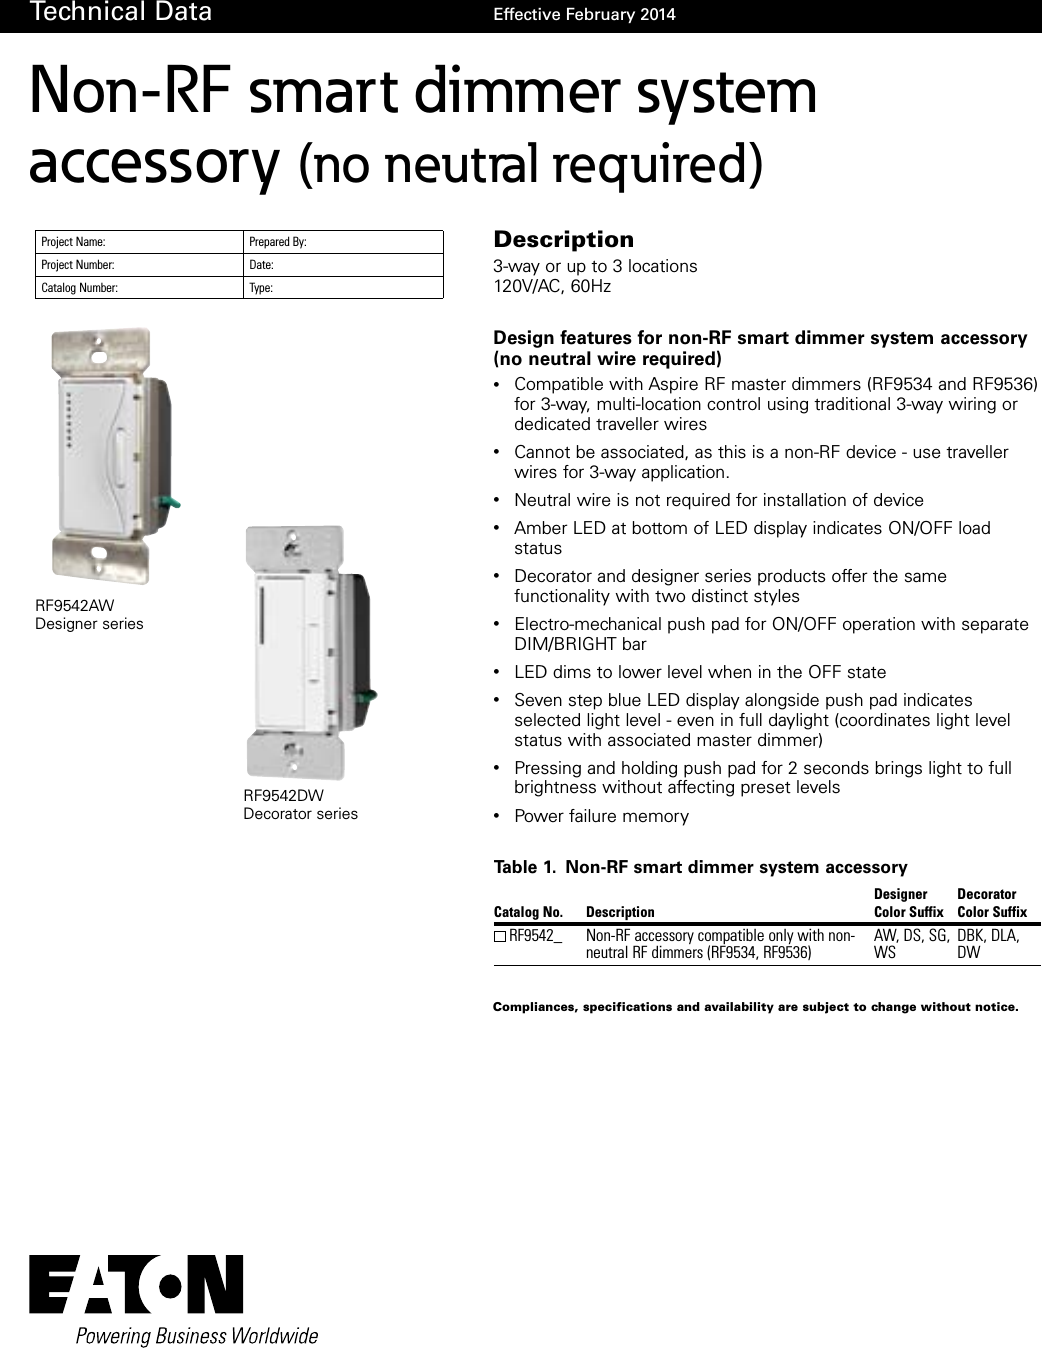 Page 1 of 4 - Z-Wave B004Fw2Ndq Eaton Aspire Non-Rf Rf9542 Smart Dimmer System Accessory Spec Sheet User Manual